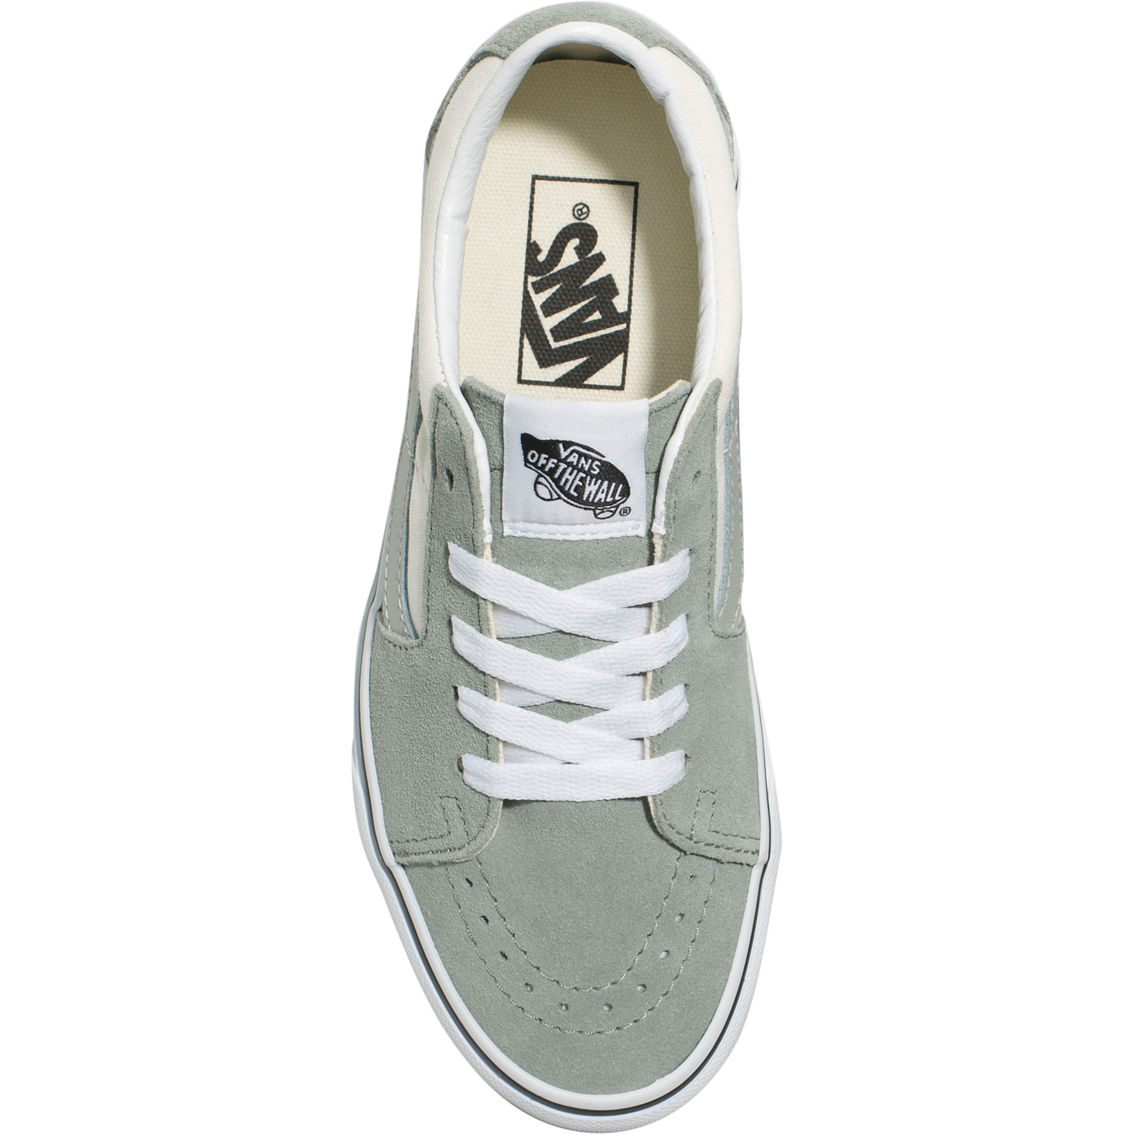 Vans SK8 Low 2 Tone Shadow Shoes - Image 3 of 4